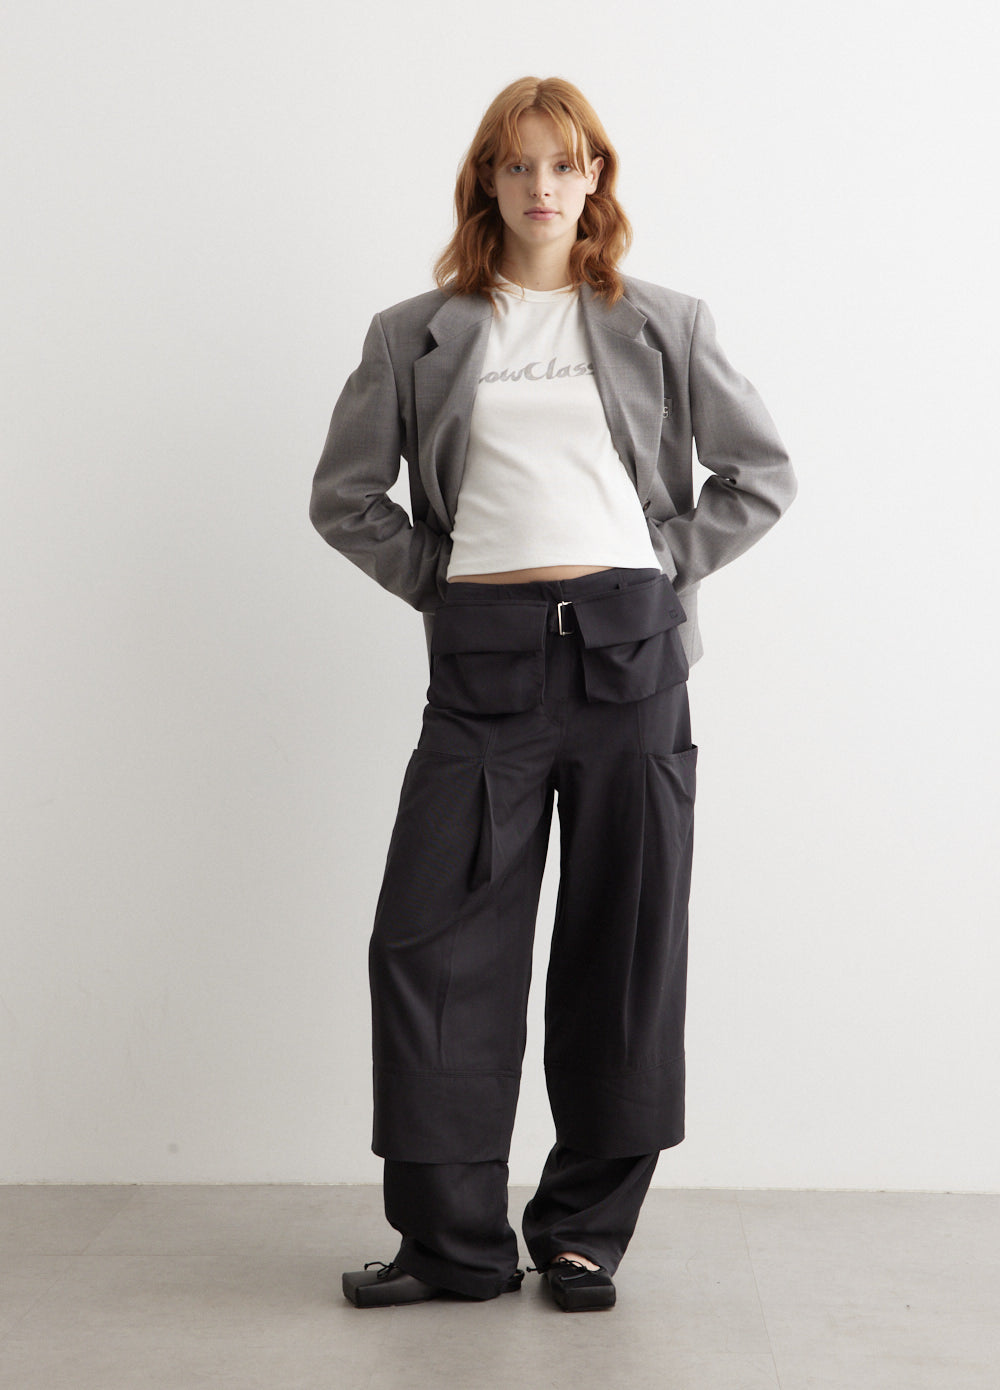 Double Belted Pocket Pants